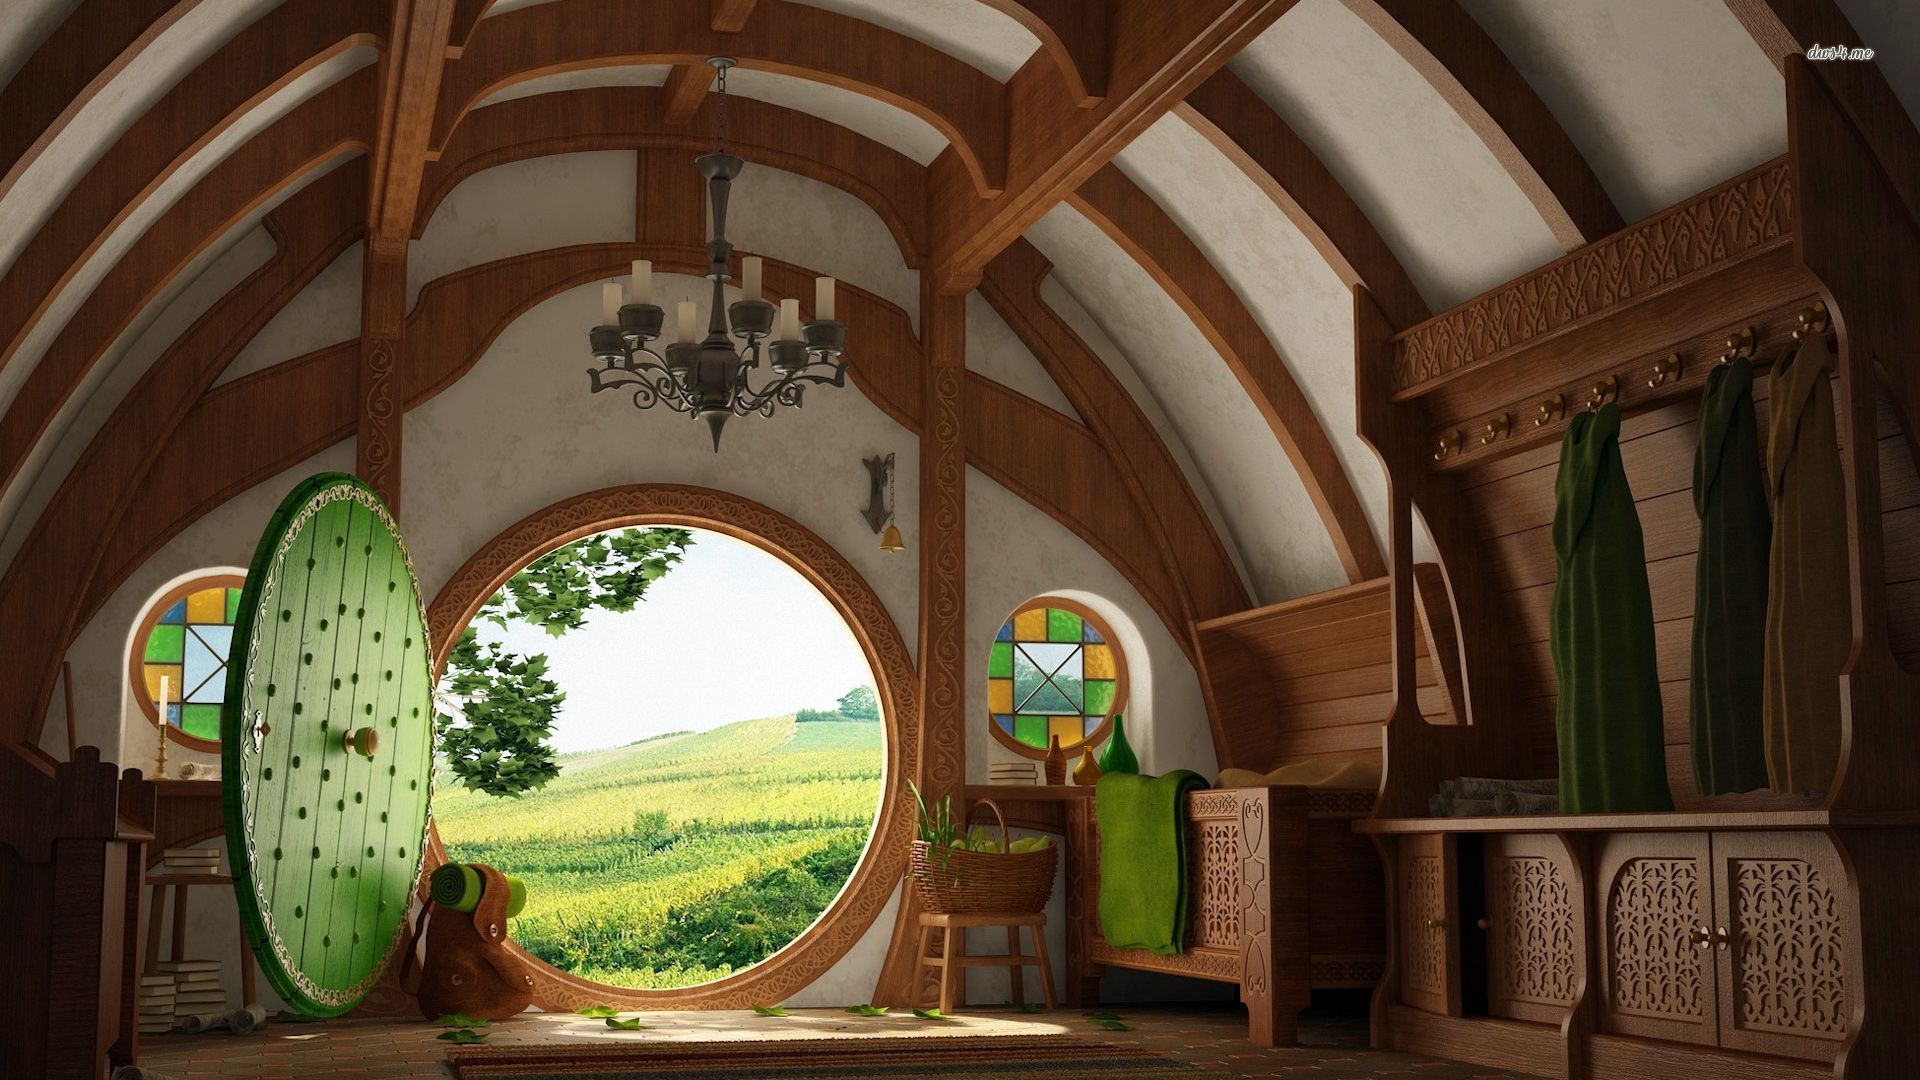 hobbit-house-hd-latest-photo-best-architecture-picture-